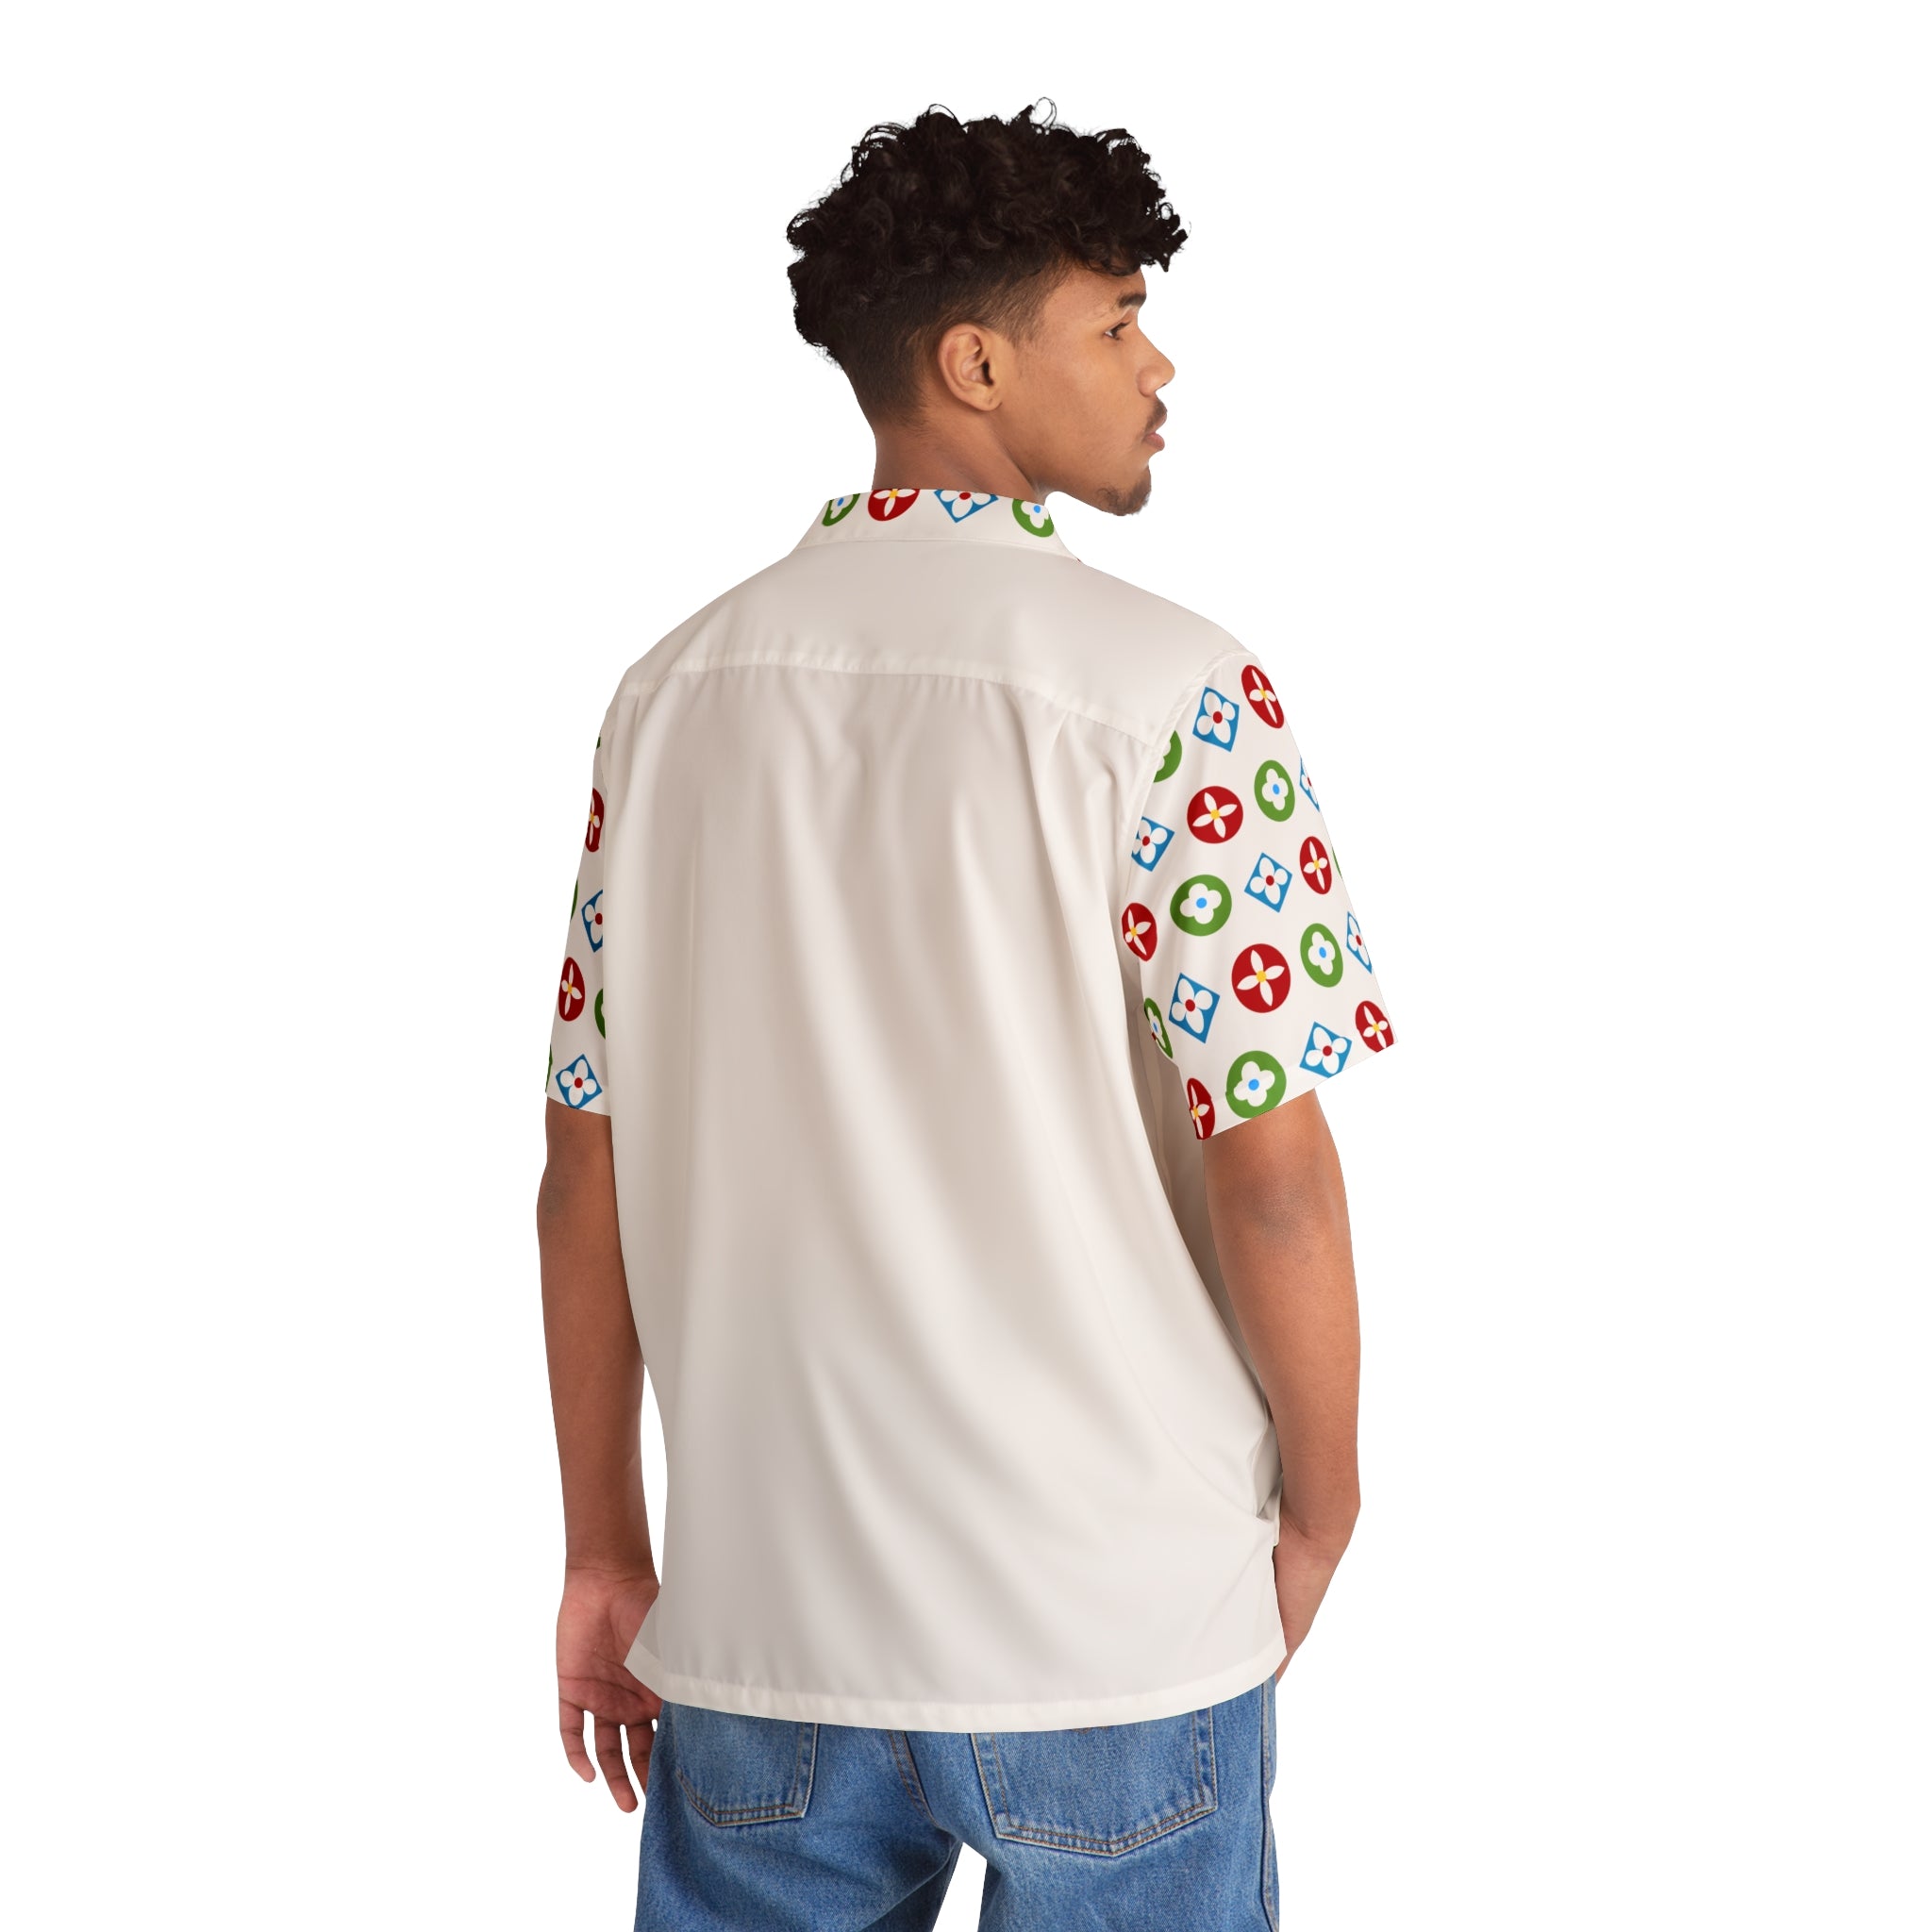  Groove Collection Trilogy of Icons Solid Block (Red, Green, Blue) White Unisex Gender Neutral Button Up Shirt, Hawaiian Shirt Men's Shirts